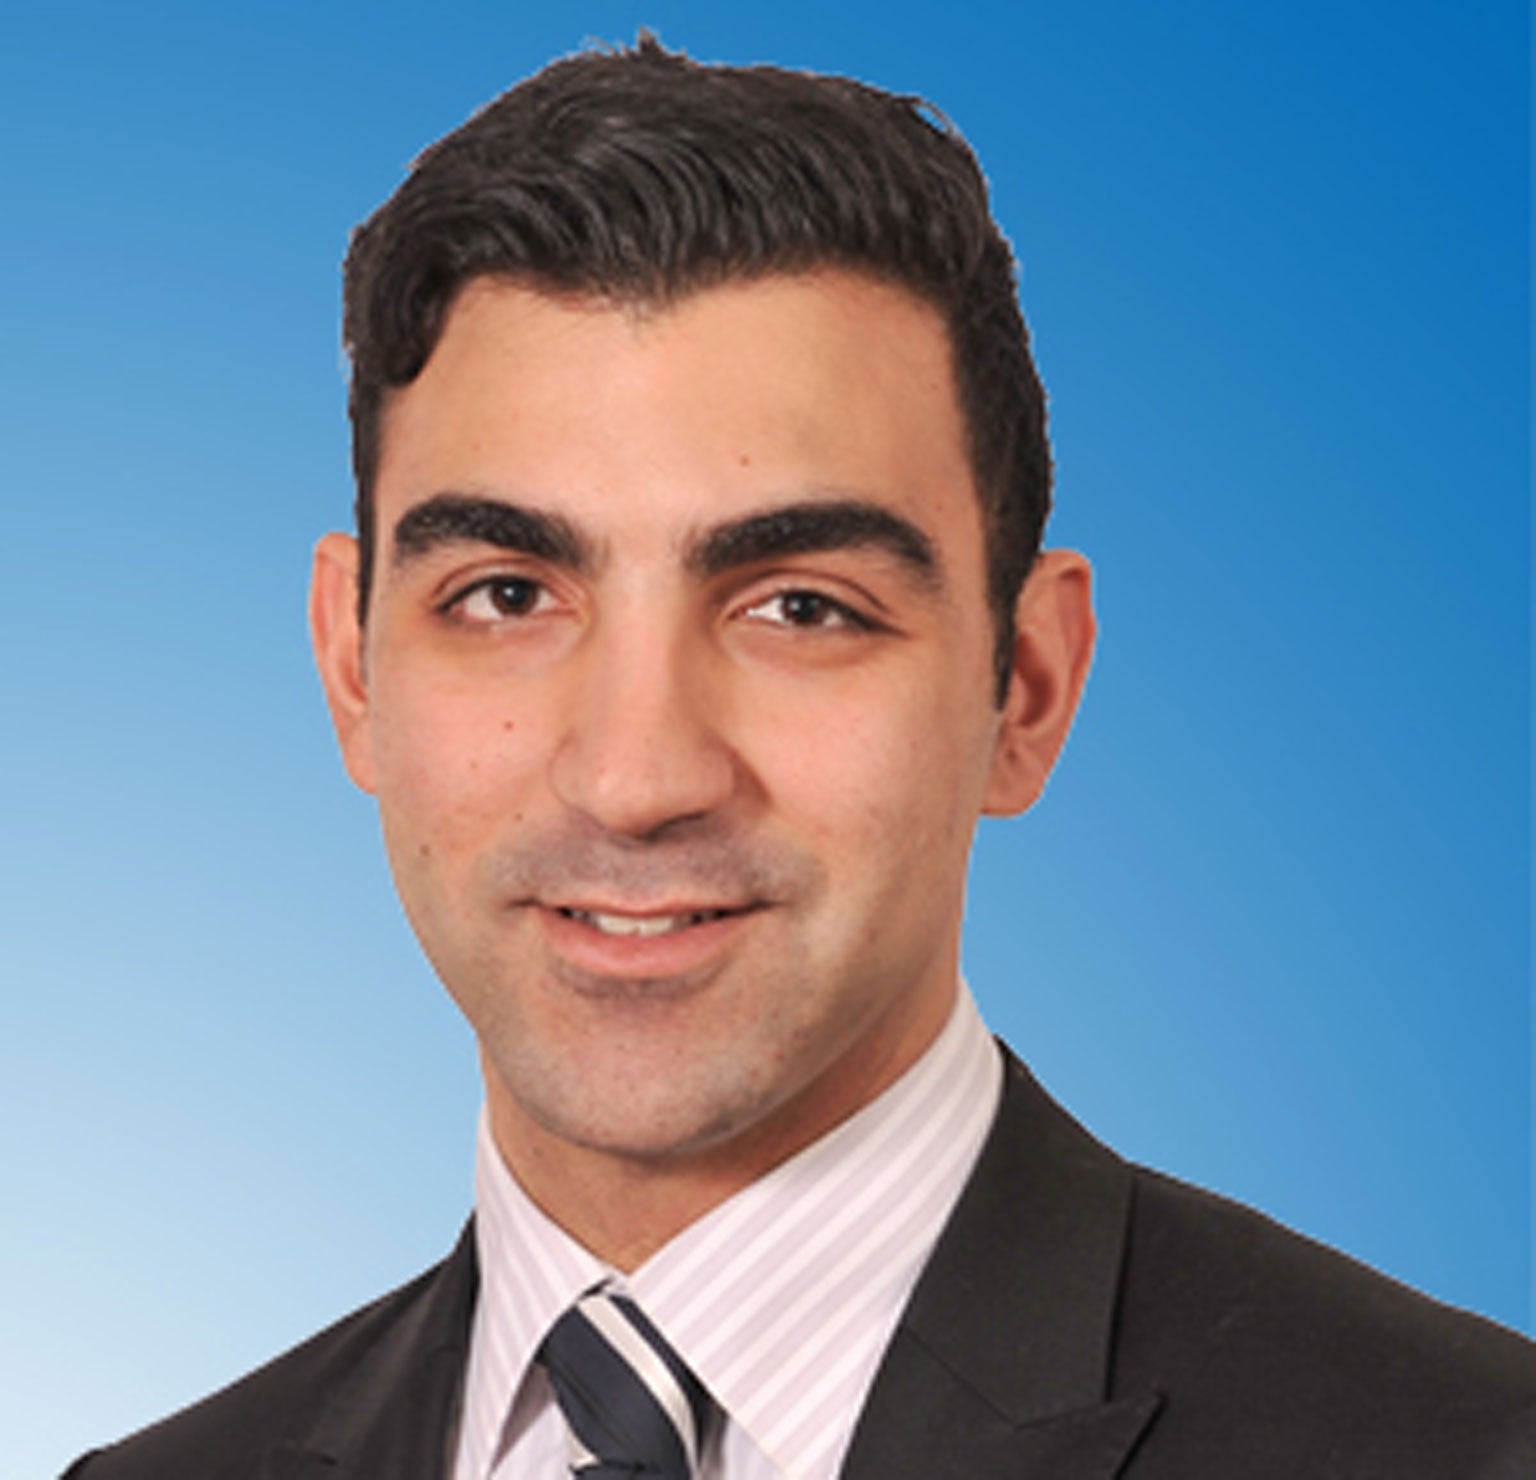 Anthony Antoniadis' picture from his profile on the Liberal Party's website, which says he has 'strong business ties to the electorate of Ramsay'